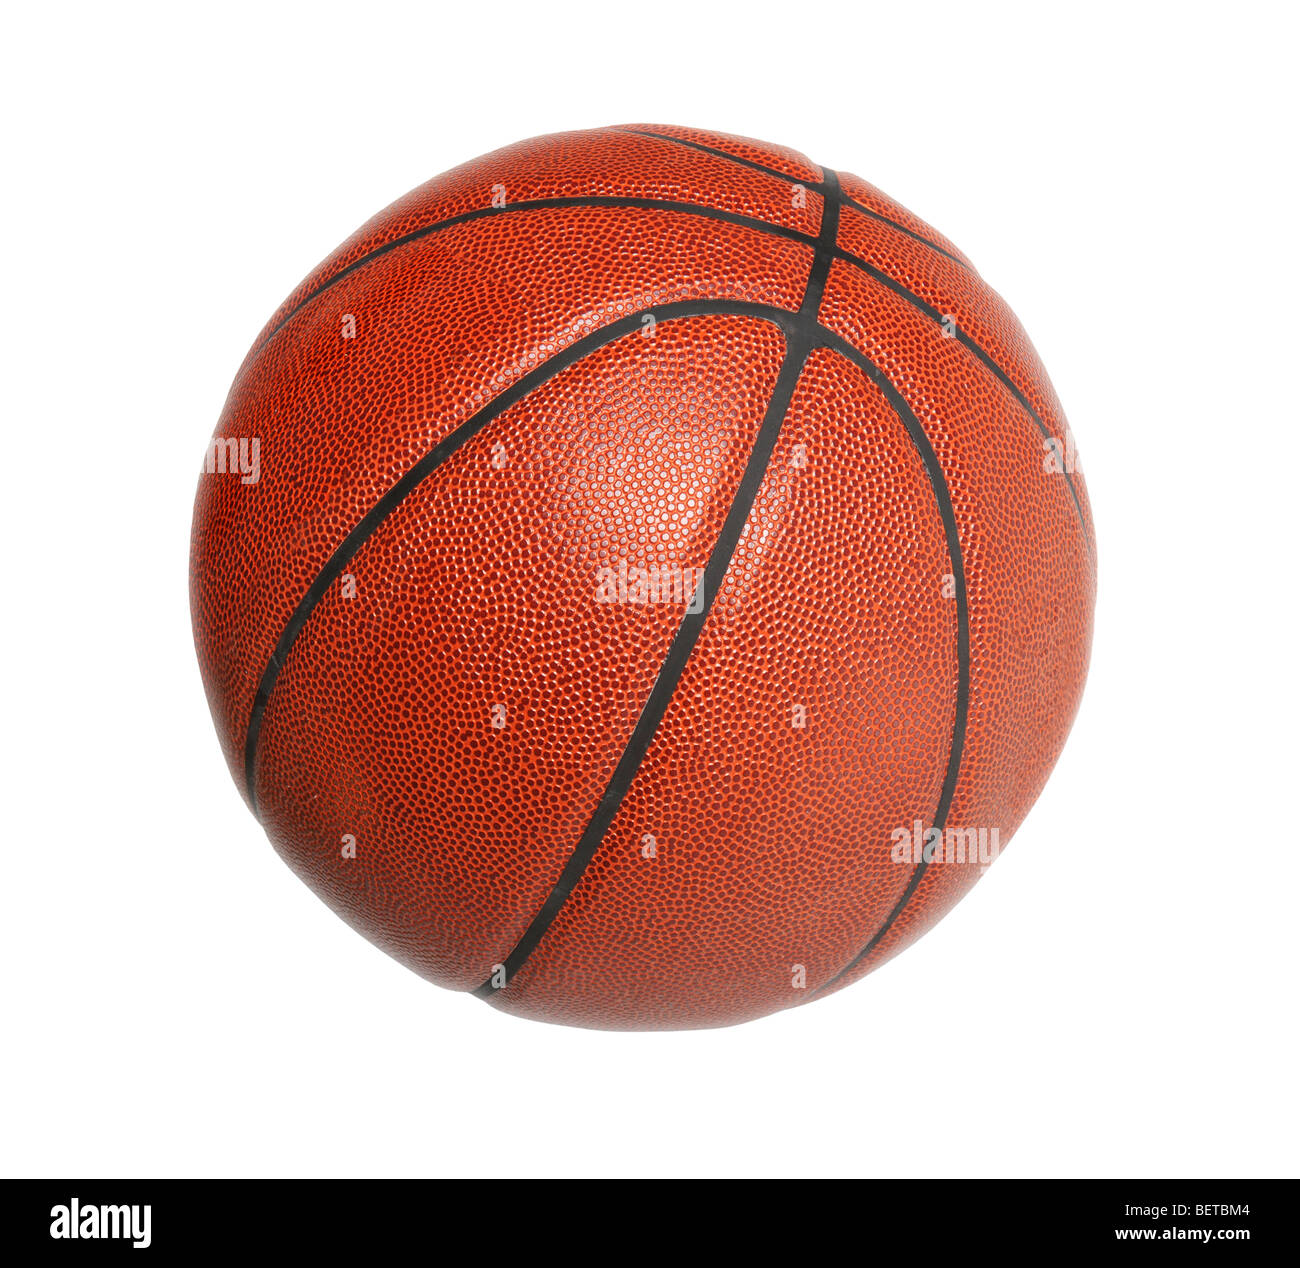 Basket-ball isolated over white background Banque D'Images